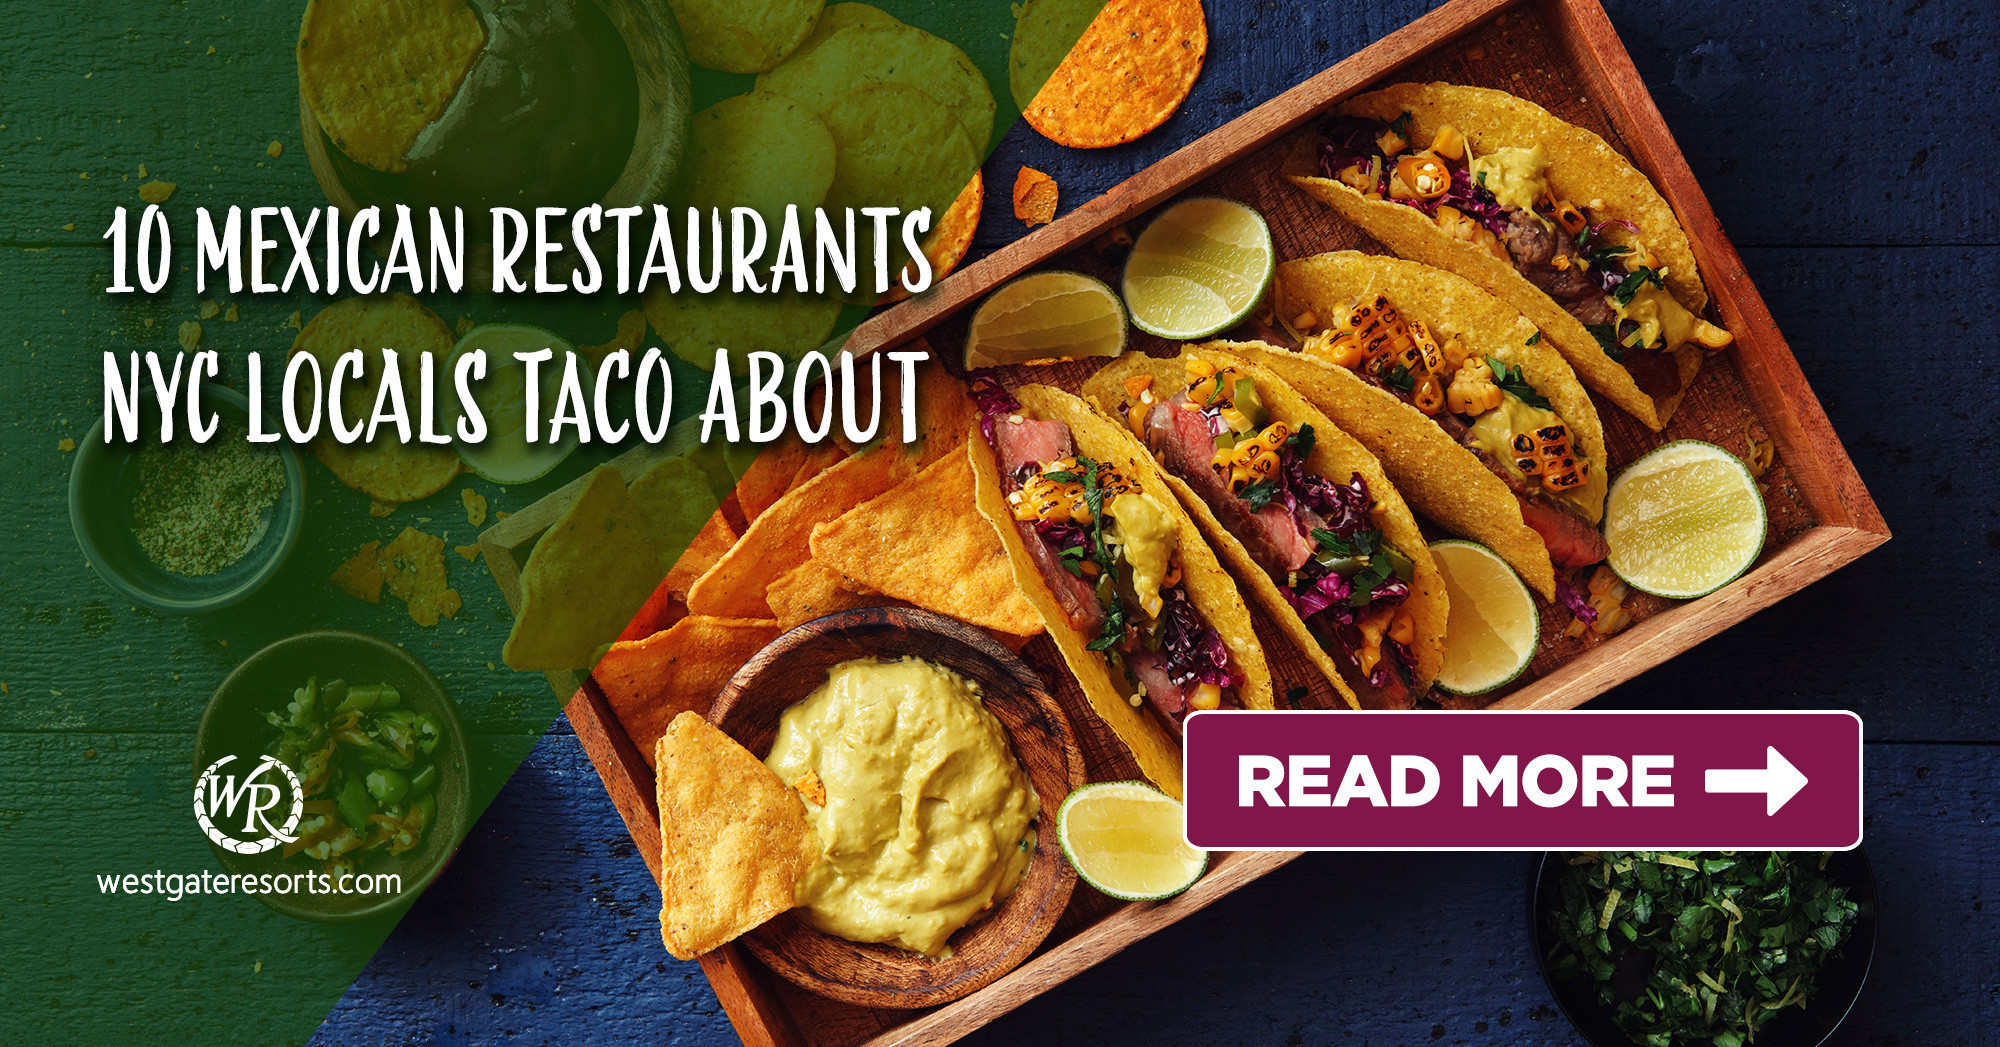 10 Mexican Restaurants NYC Locals Talk About